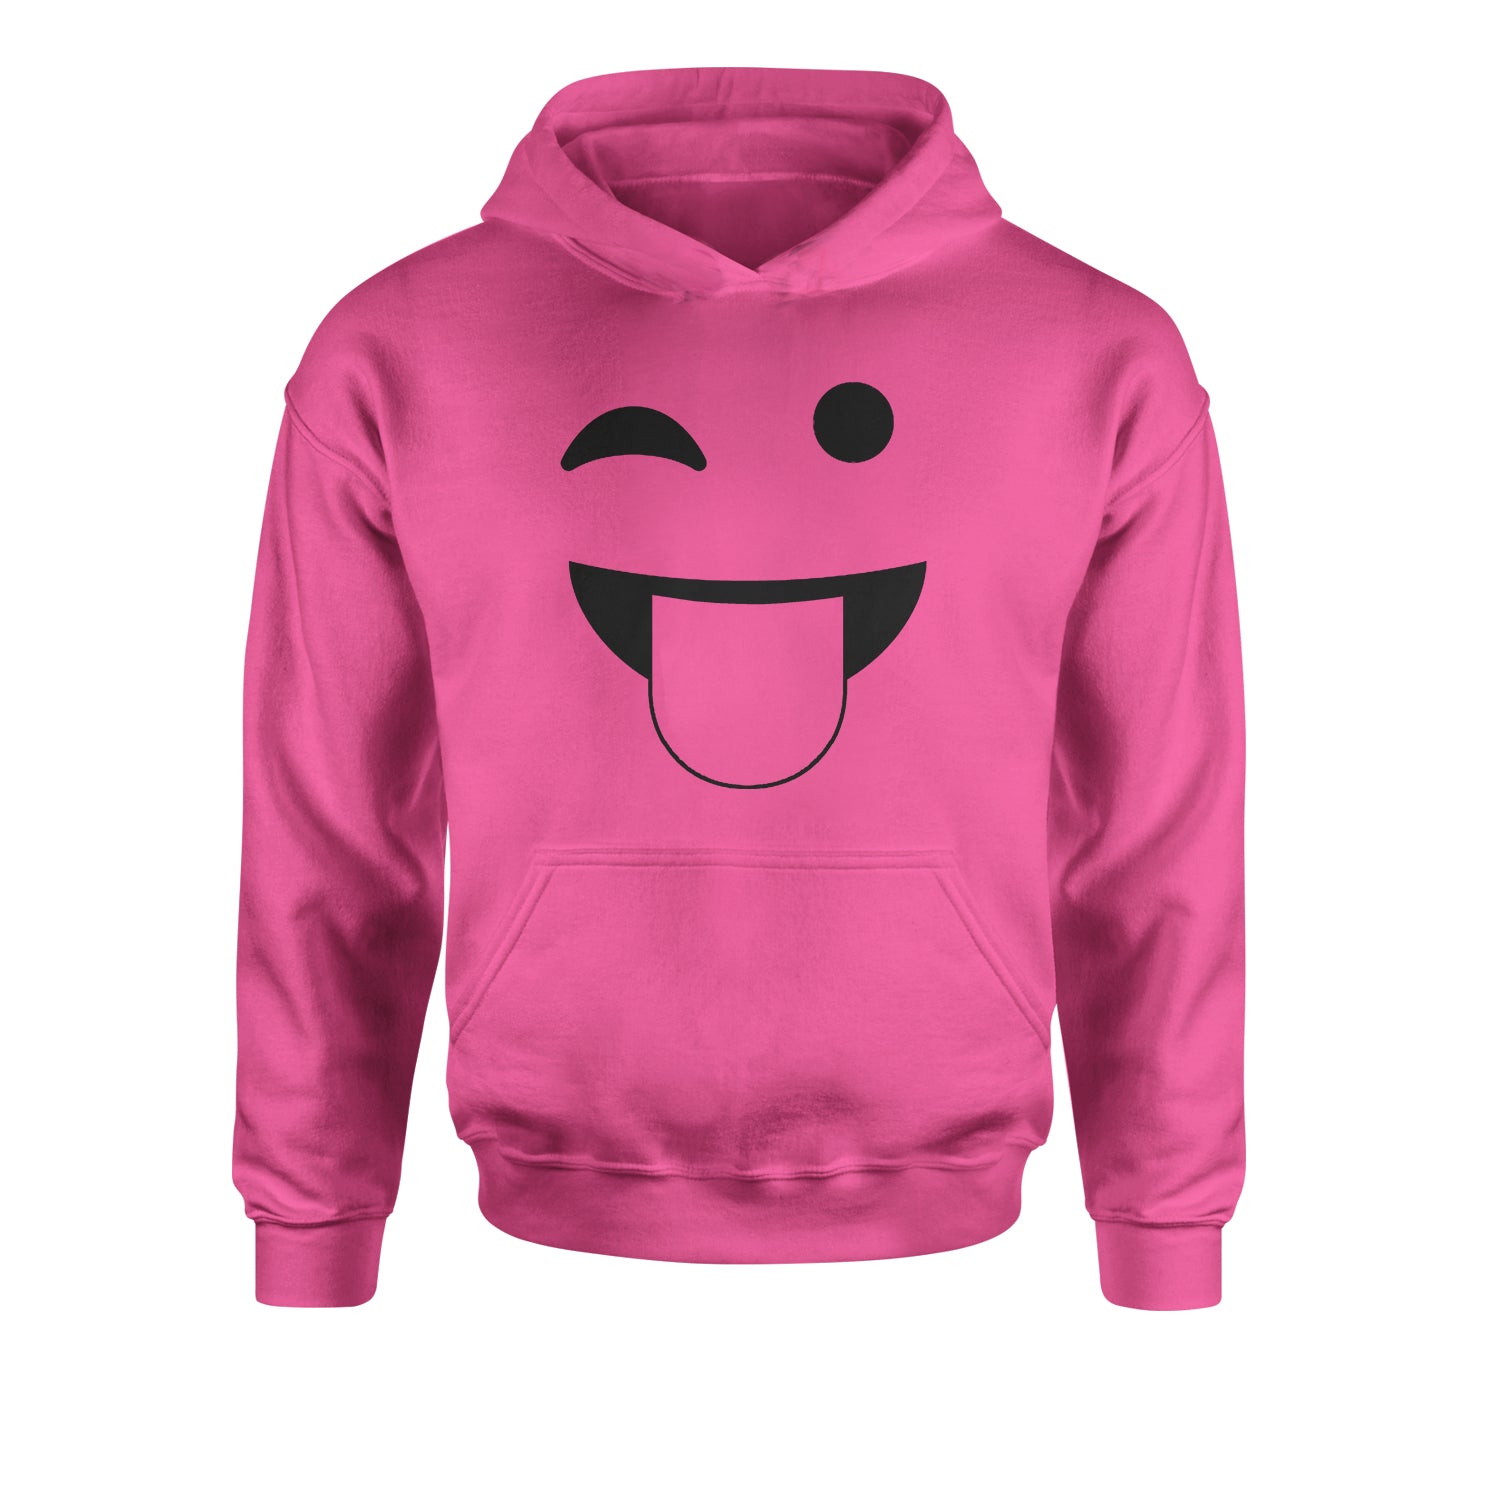 Emoticon Tongue Hanging Out Smile Face Youth-Sized Hoodie cosplay, costume, dress, emoji, emote, face, halloween, smiley, up, yellow, youth-sized by Expression Tees